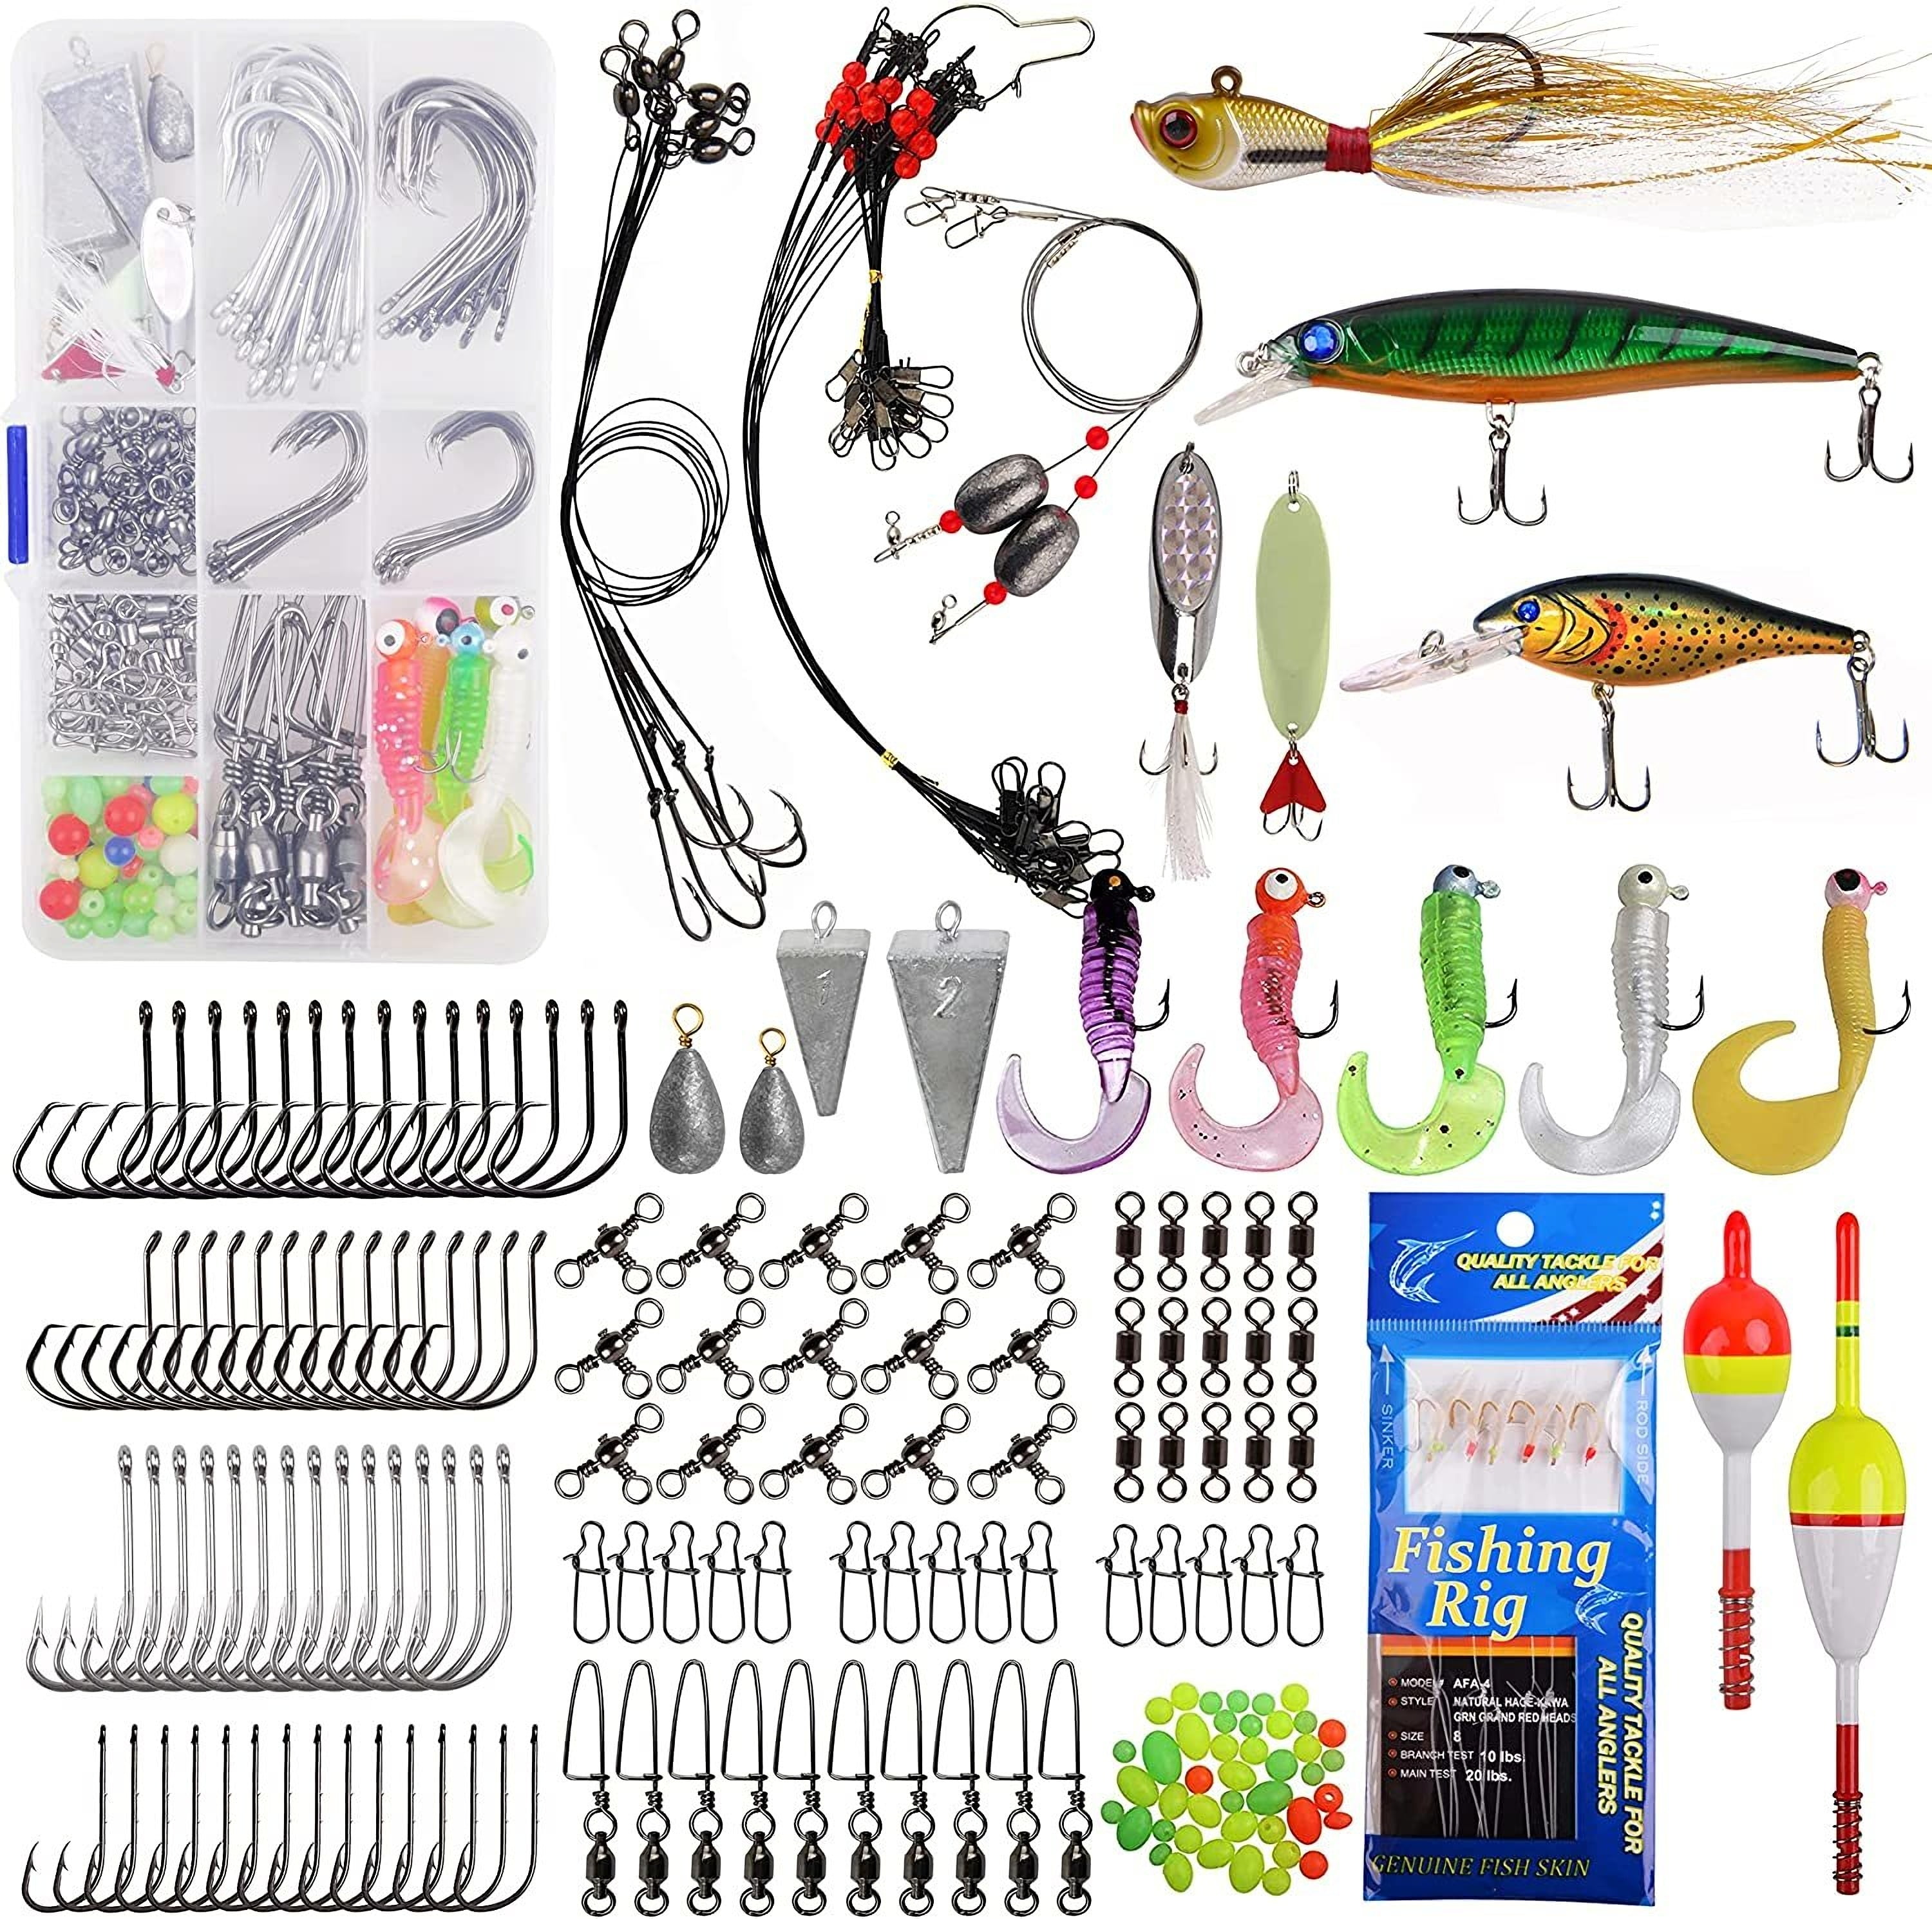  Fishing Accessories Kit, Fishing Set with Tackle Box, Fishing  Hooks, Weights, Jig Heads, O-Rings, Barrel Swivels, Fastlock Snaps, Fishing  Beads, Space Beans(Freshwater) : Sports & Outdoors